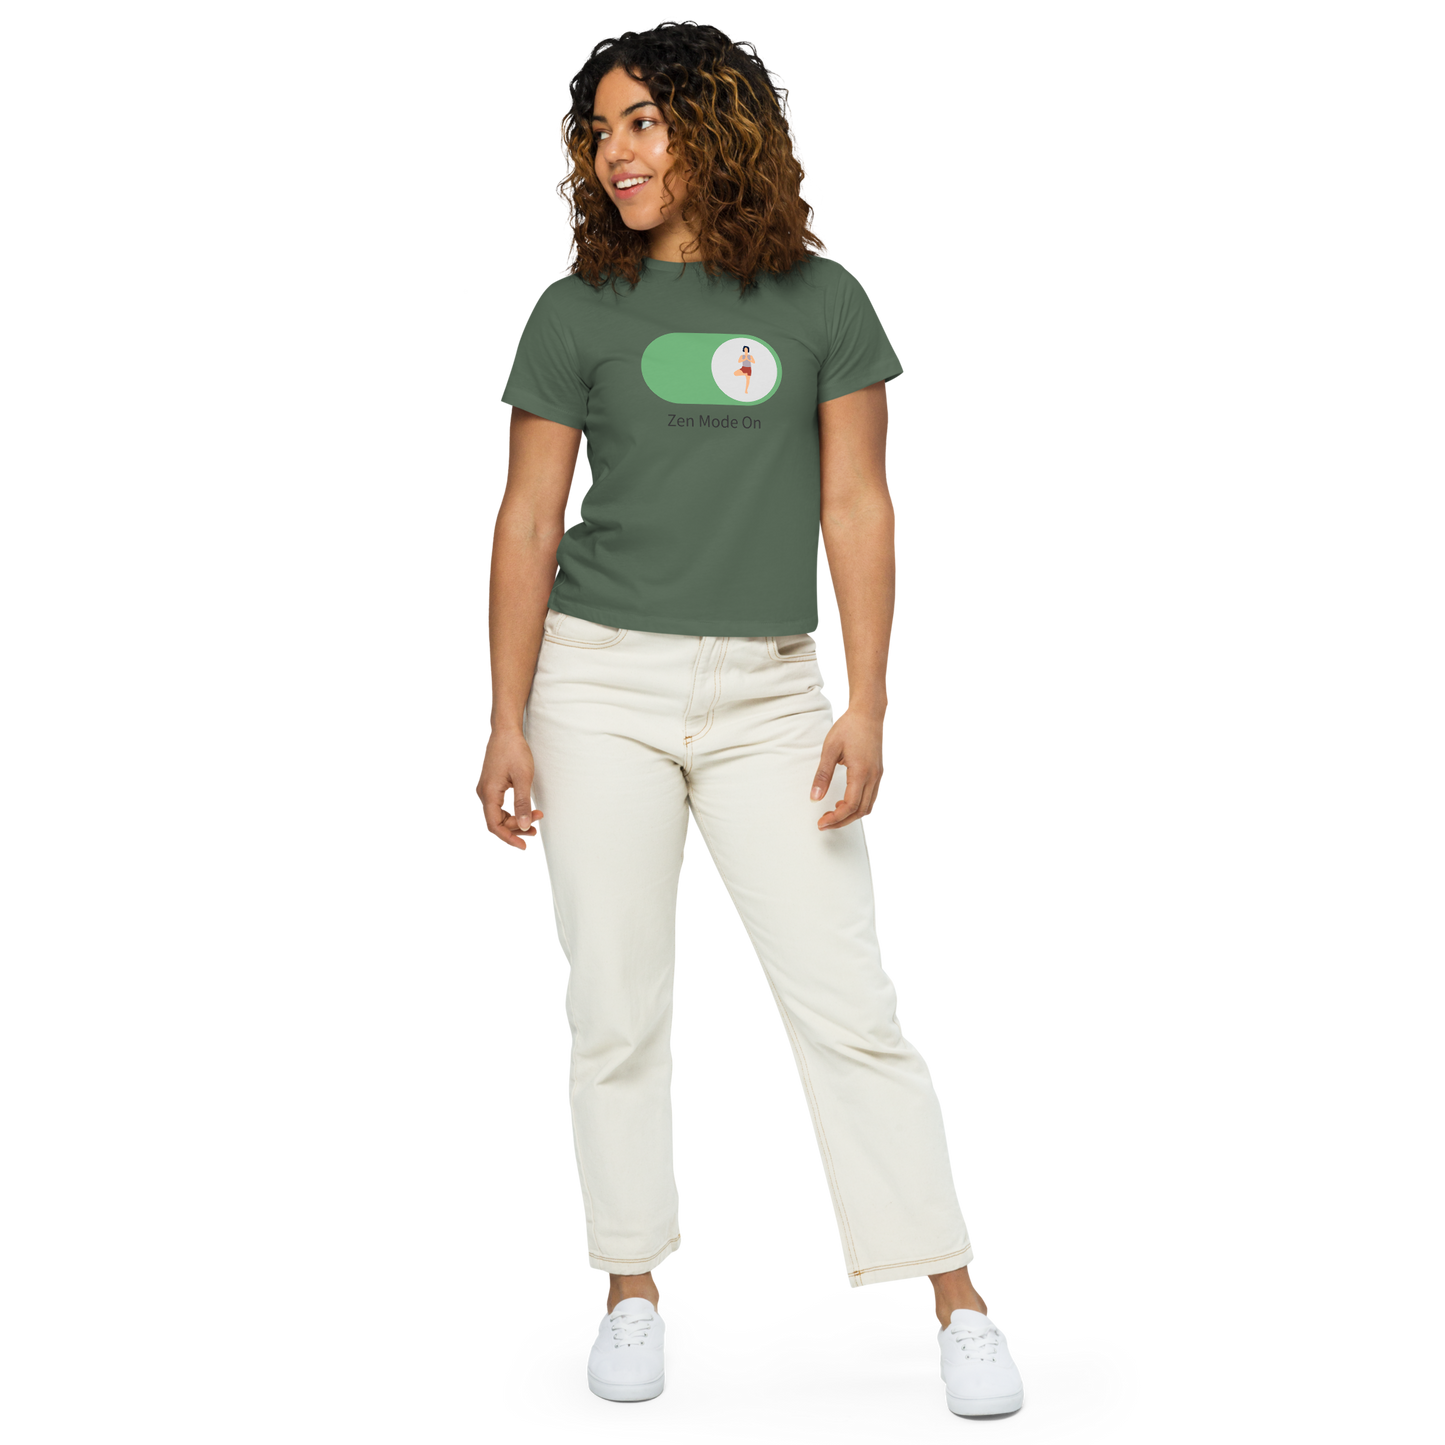 Women’s high-waisted t-shirt with quote " Zen Mode On"